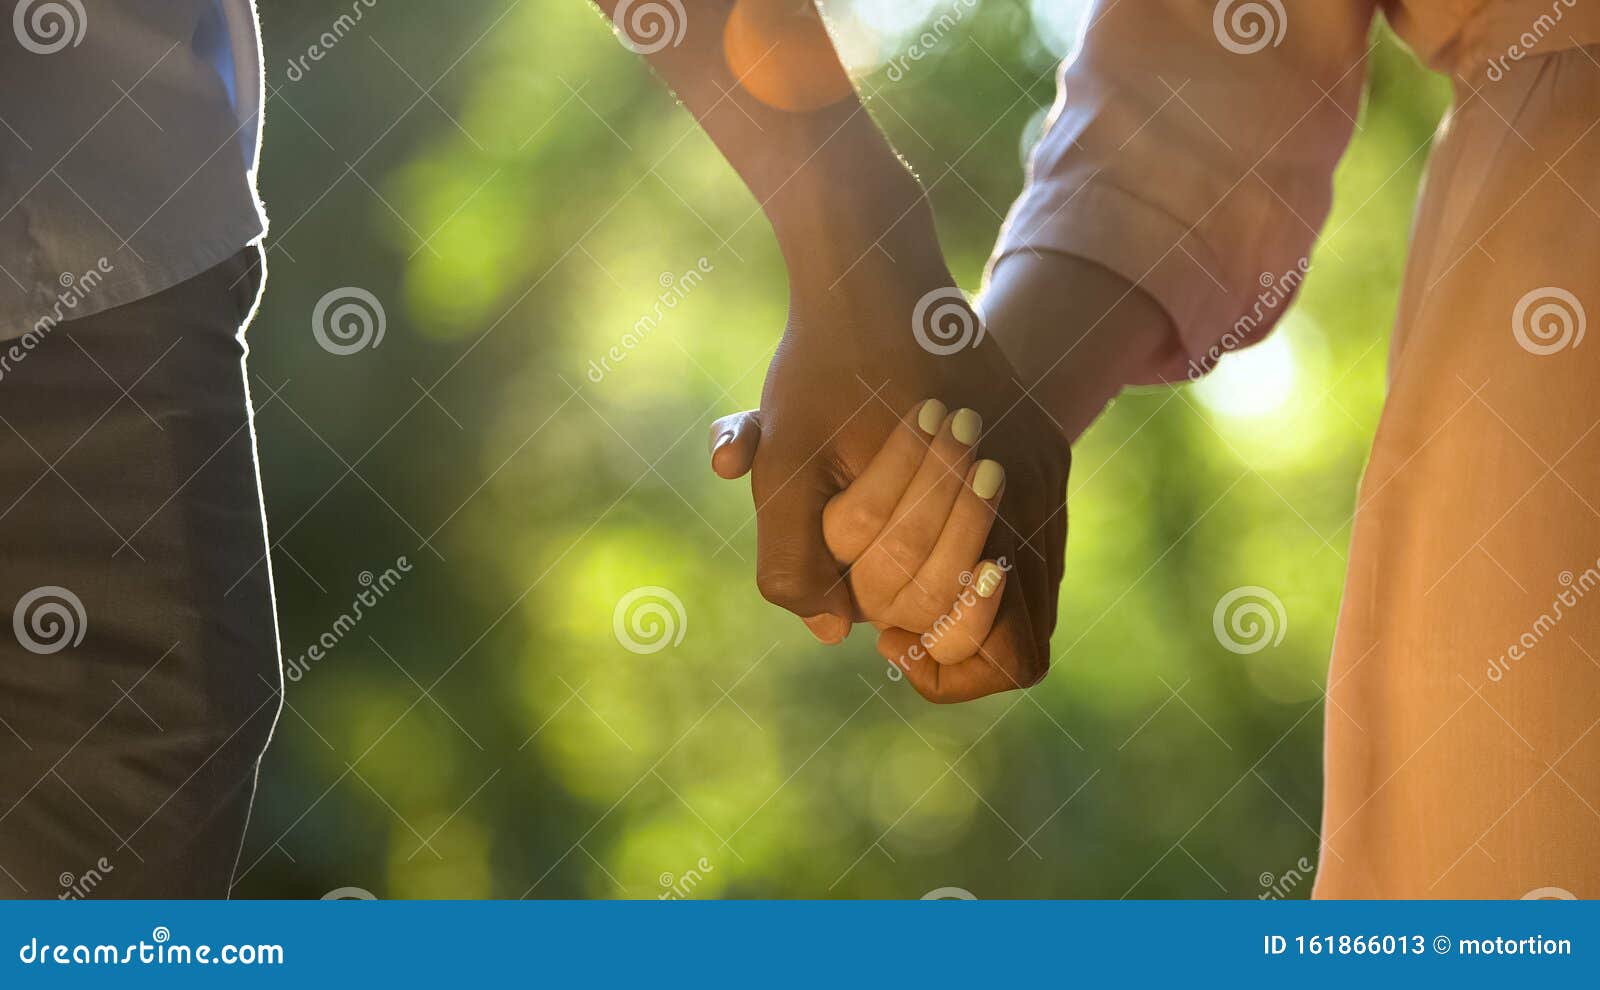 multiracial couple holding hands at sunny park, romantic and intimacy, close-up